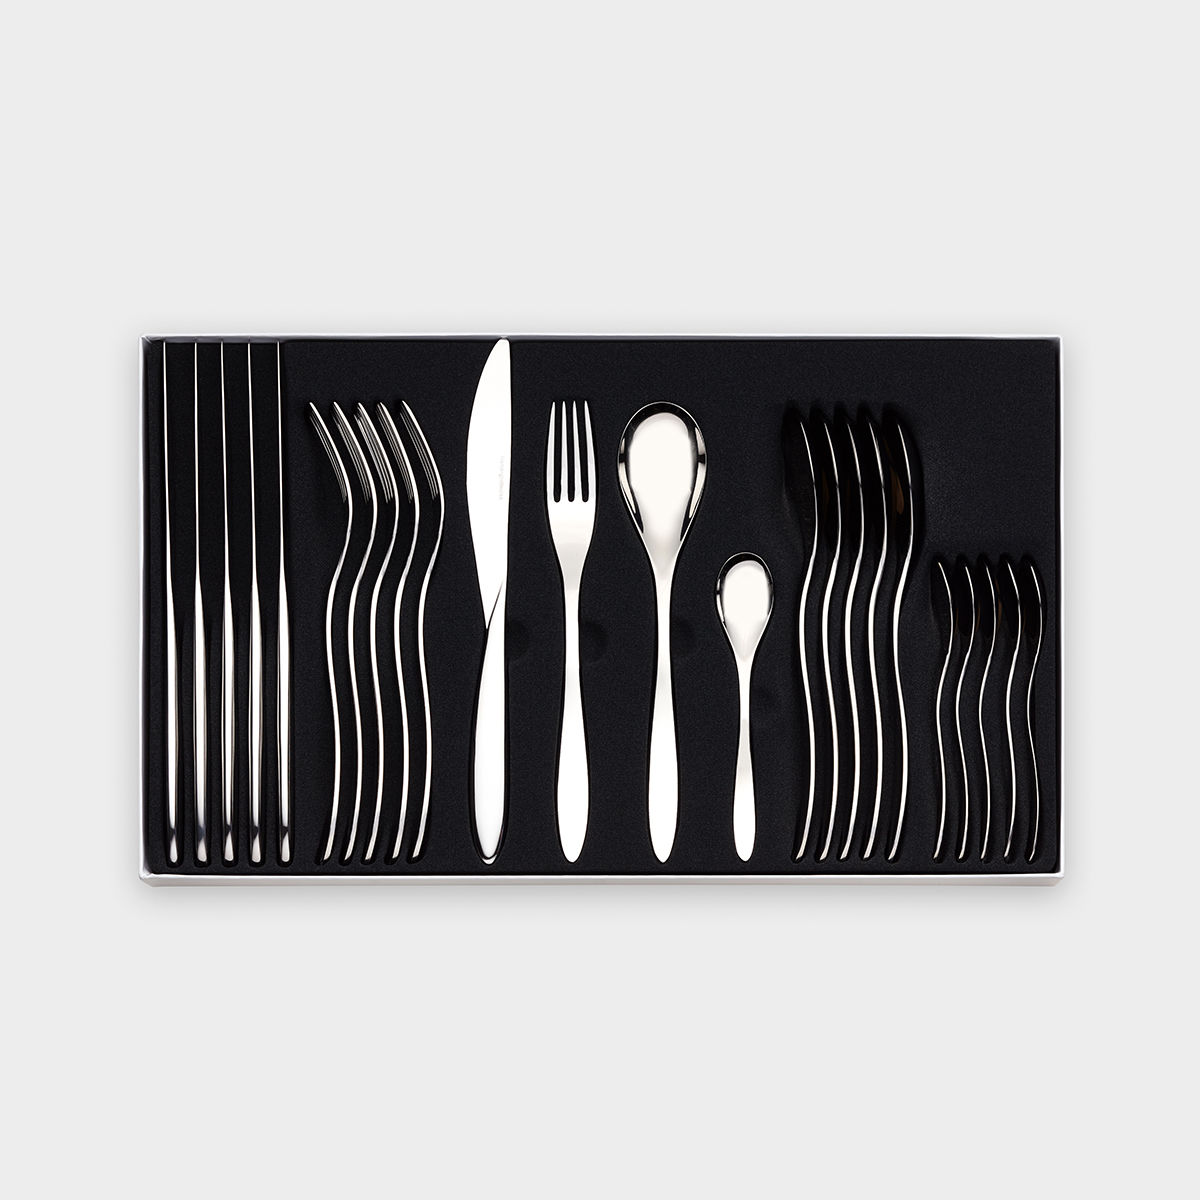 Maria cutlery set 24 pieces product image